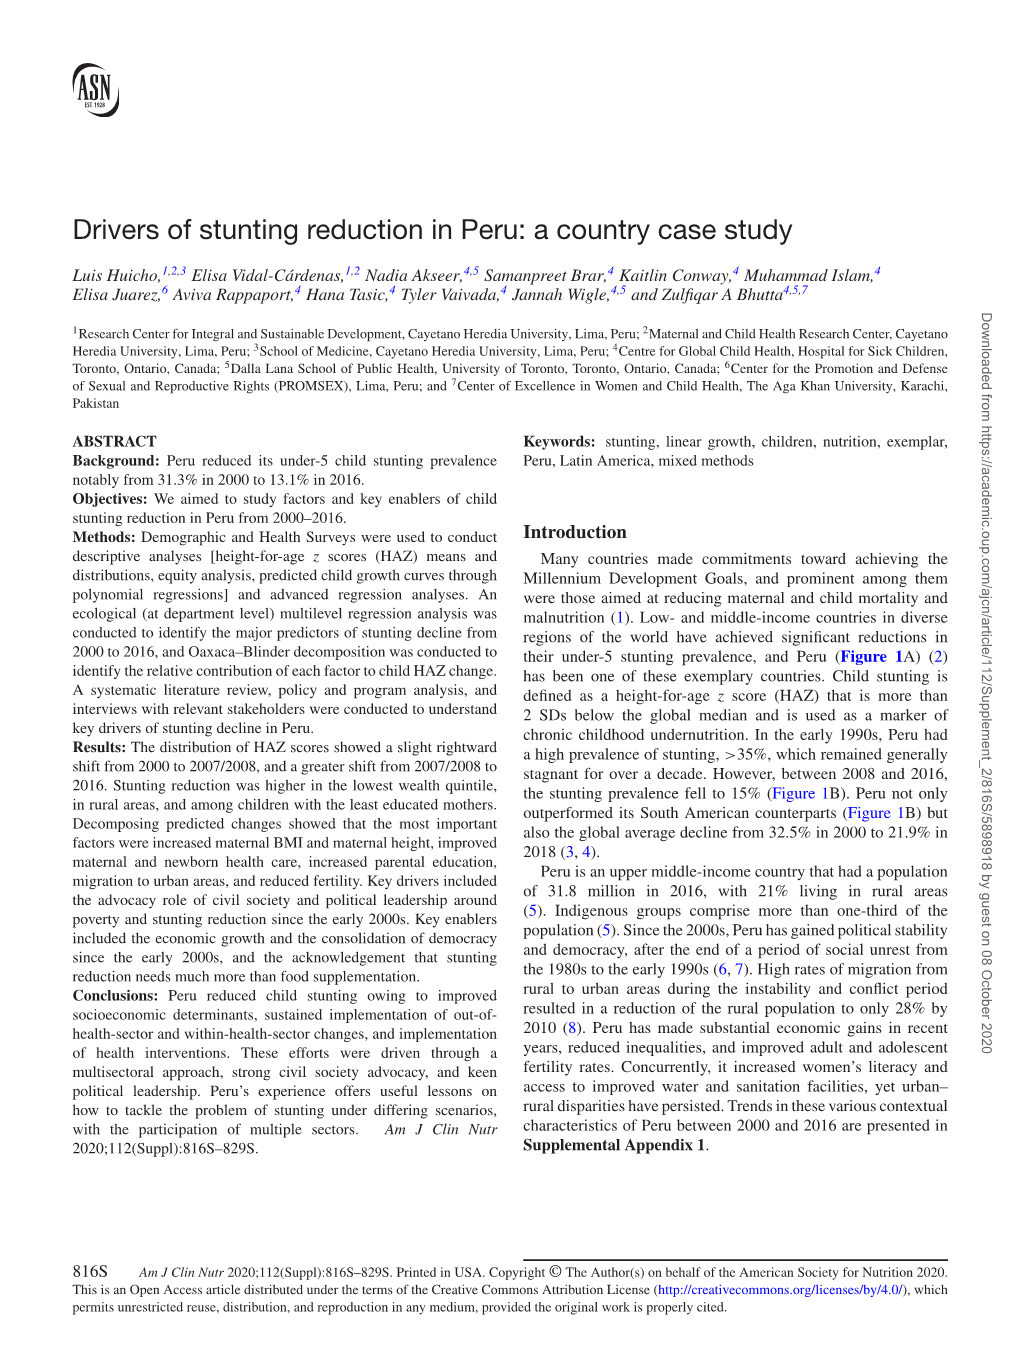 Drivers of Stunting Reduction in Peru: a Country Case Study